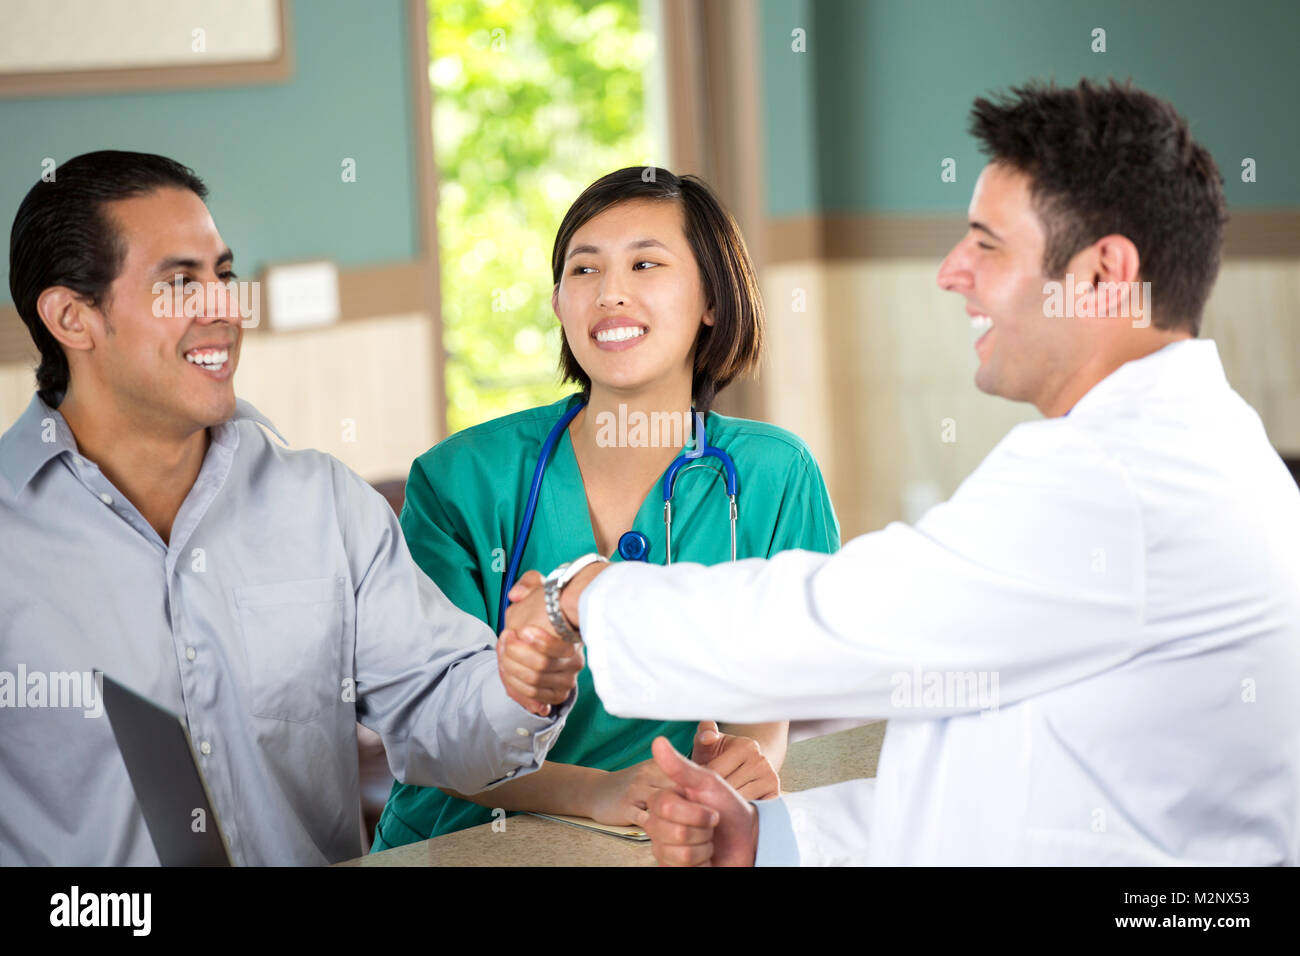 Medical team talking with patients. Stock Photo